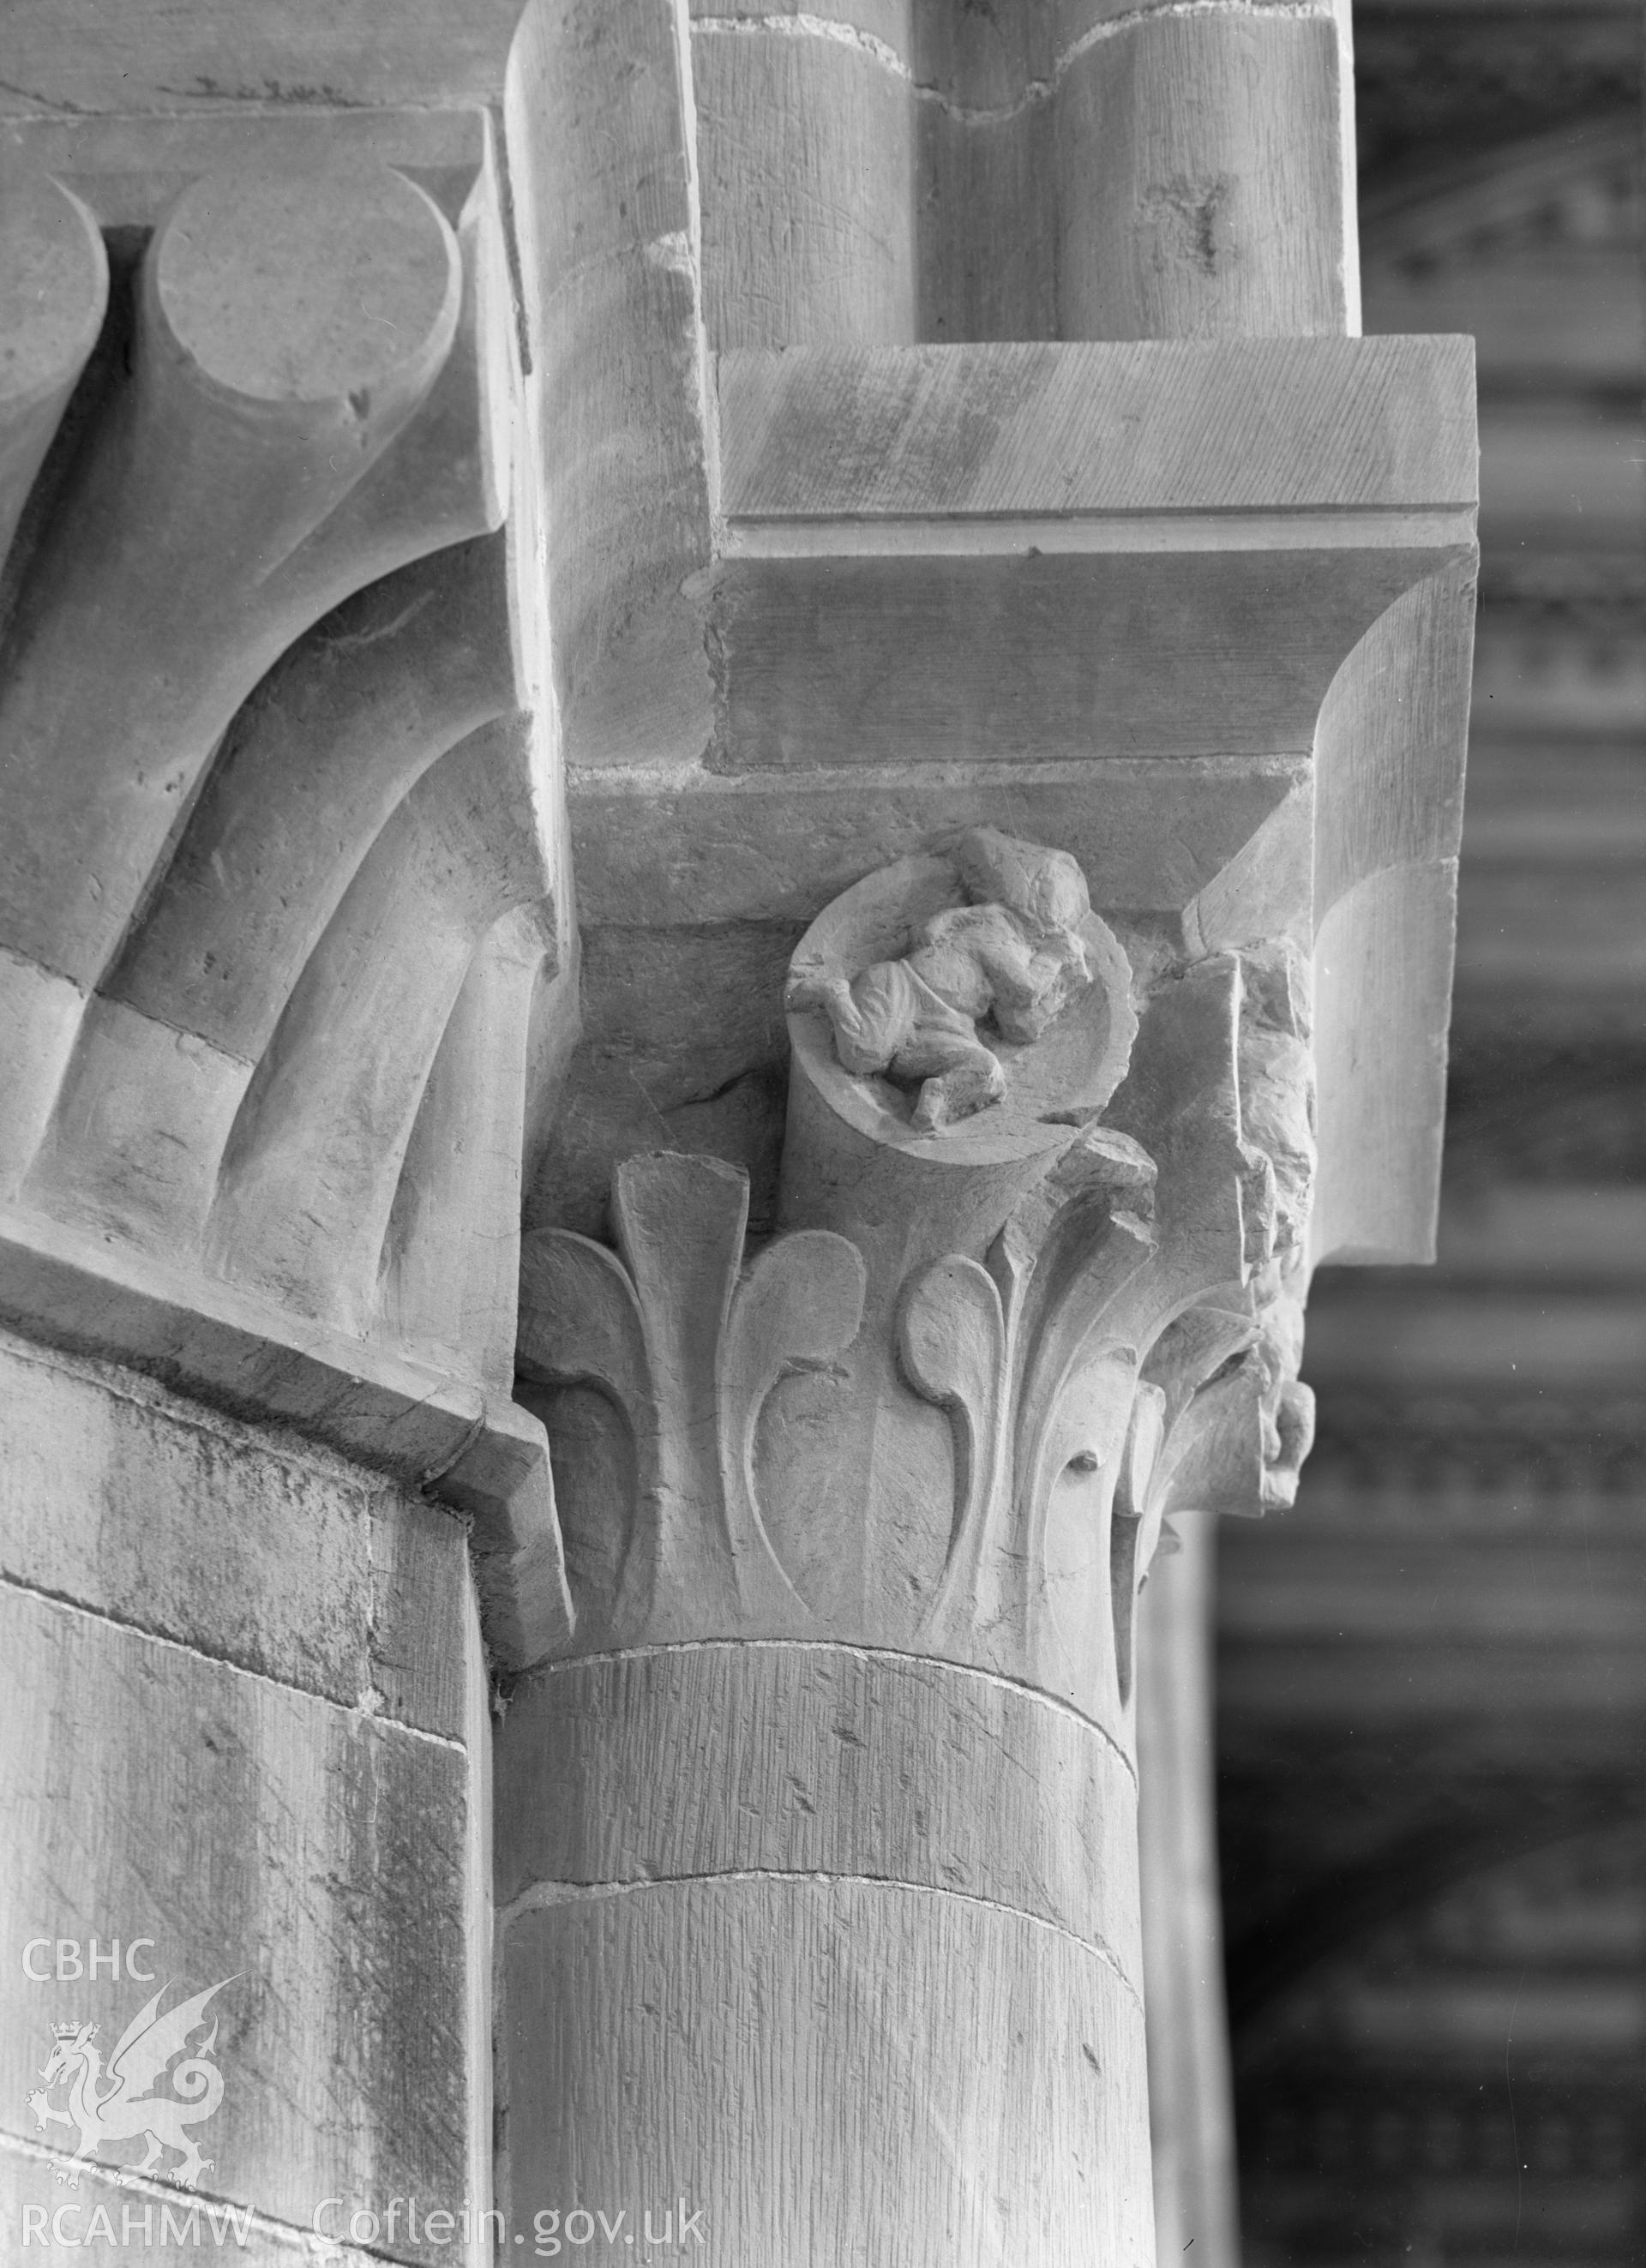 Digital copy of a black and white nitrate negative showing detail of capital at St. David's Cathedral, taken by E.W. Lovegrove, July 1936.